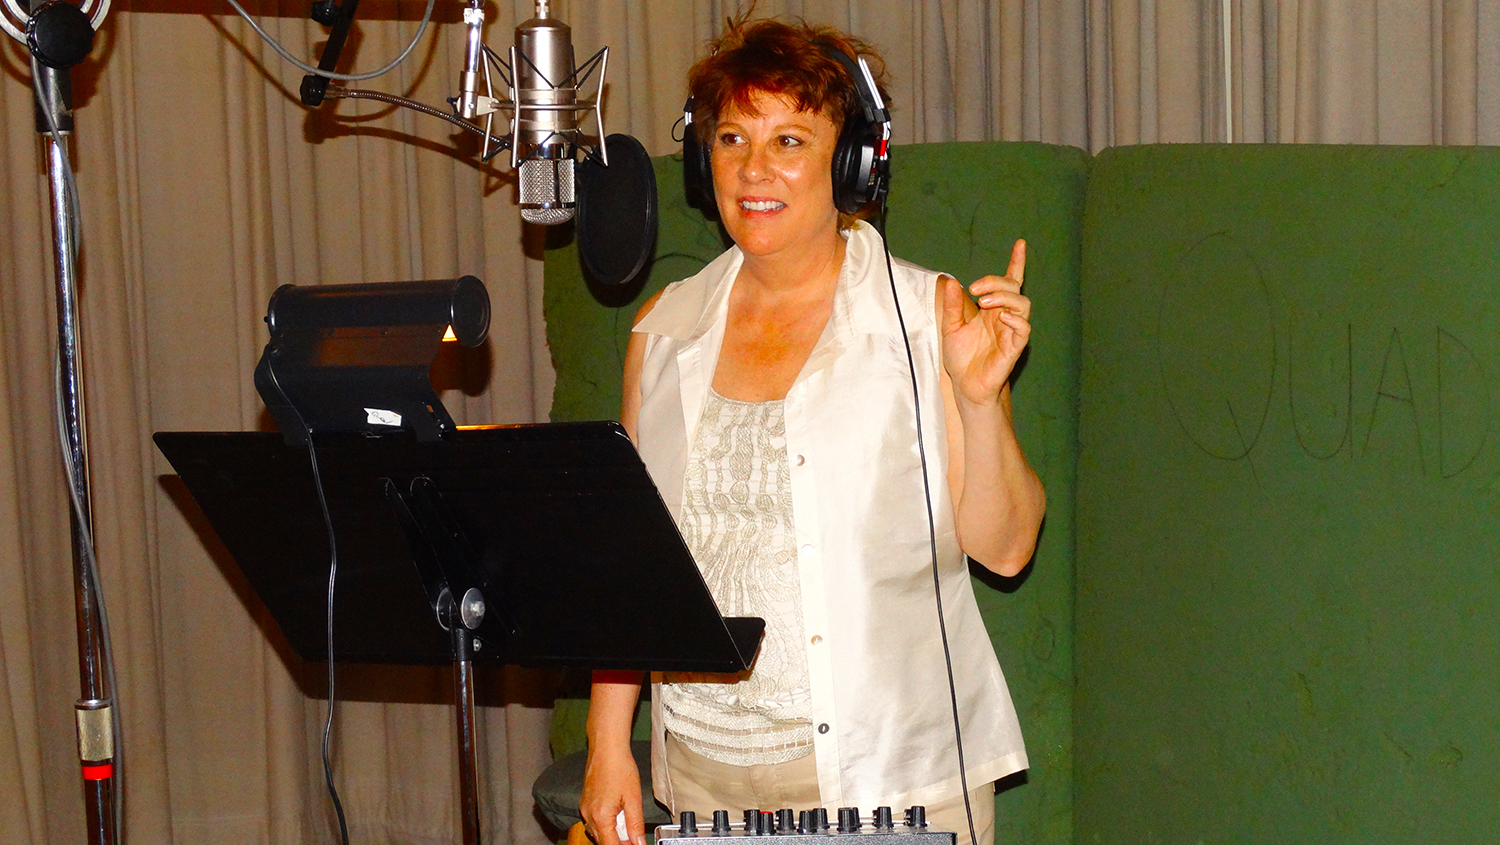 Amy Otey Voice Over Expert